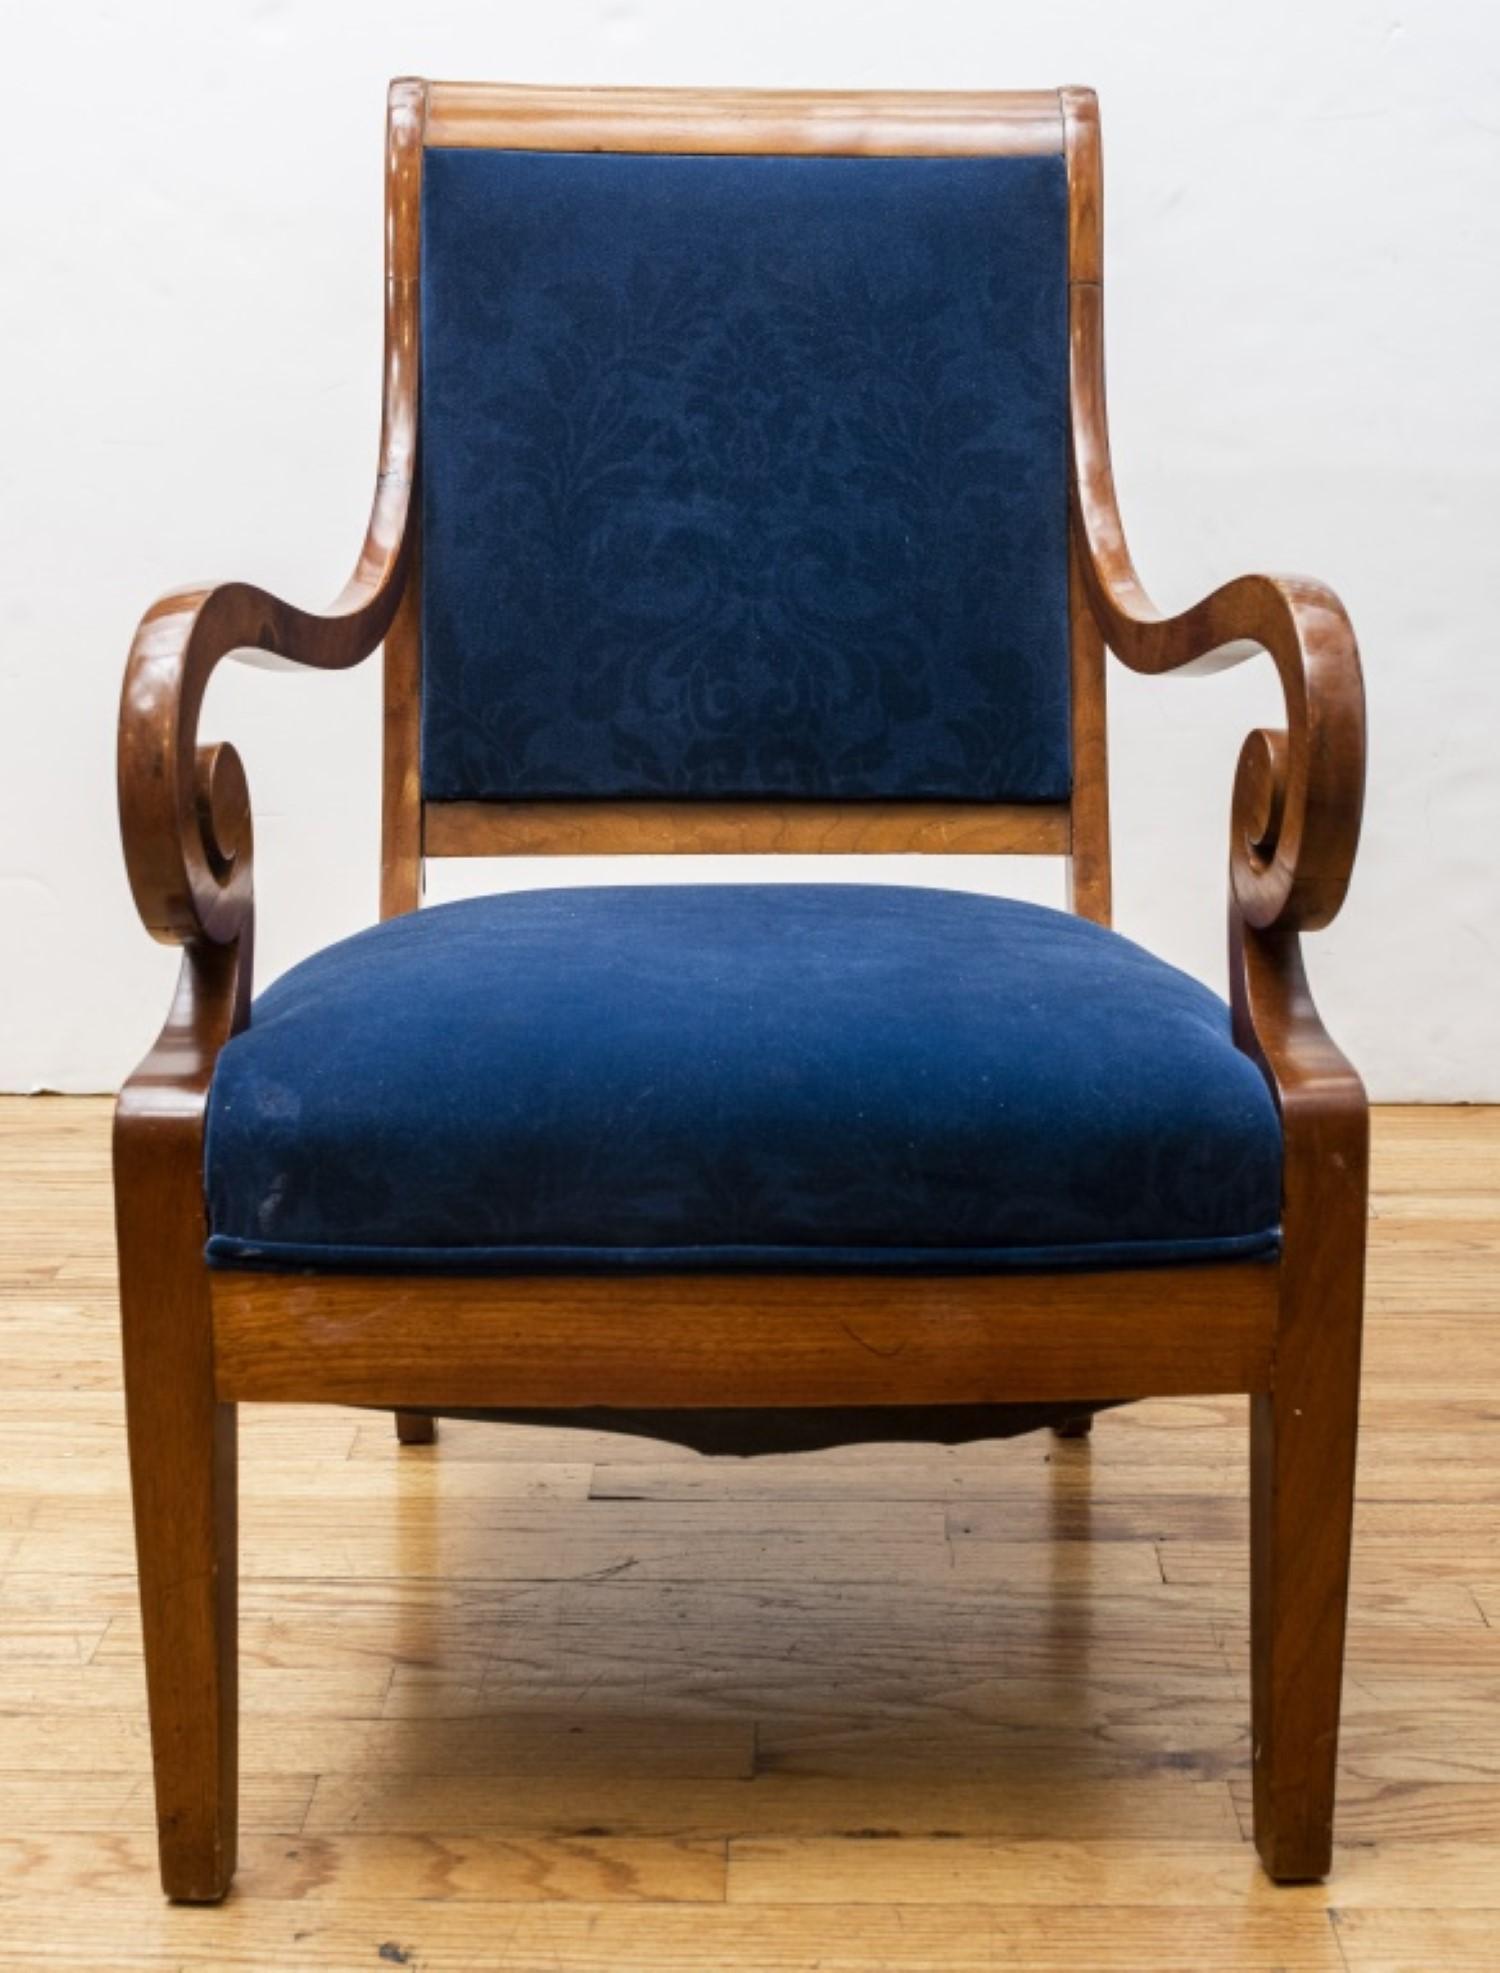 Danish Neoclassical Empire carved wood armchairs.

Featuring graceful scrolled armrests and luxuriously upholstered backs and seats.
Crafted from Danish wood in the Neoclassical Empire style.

Dealer: S138XX